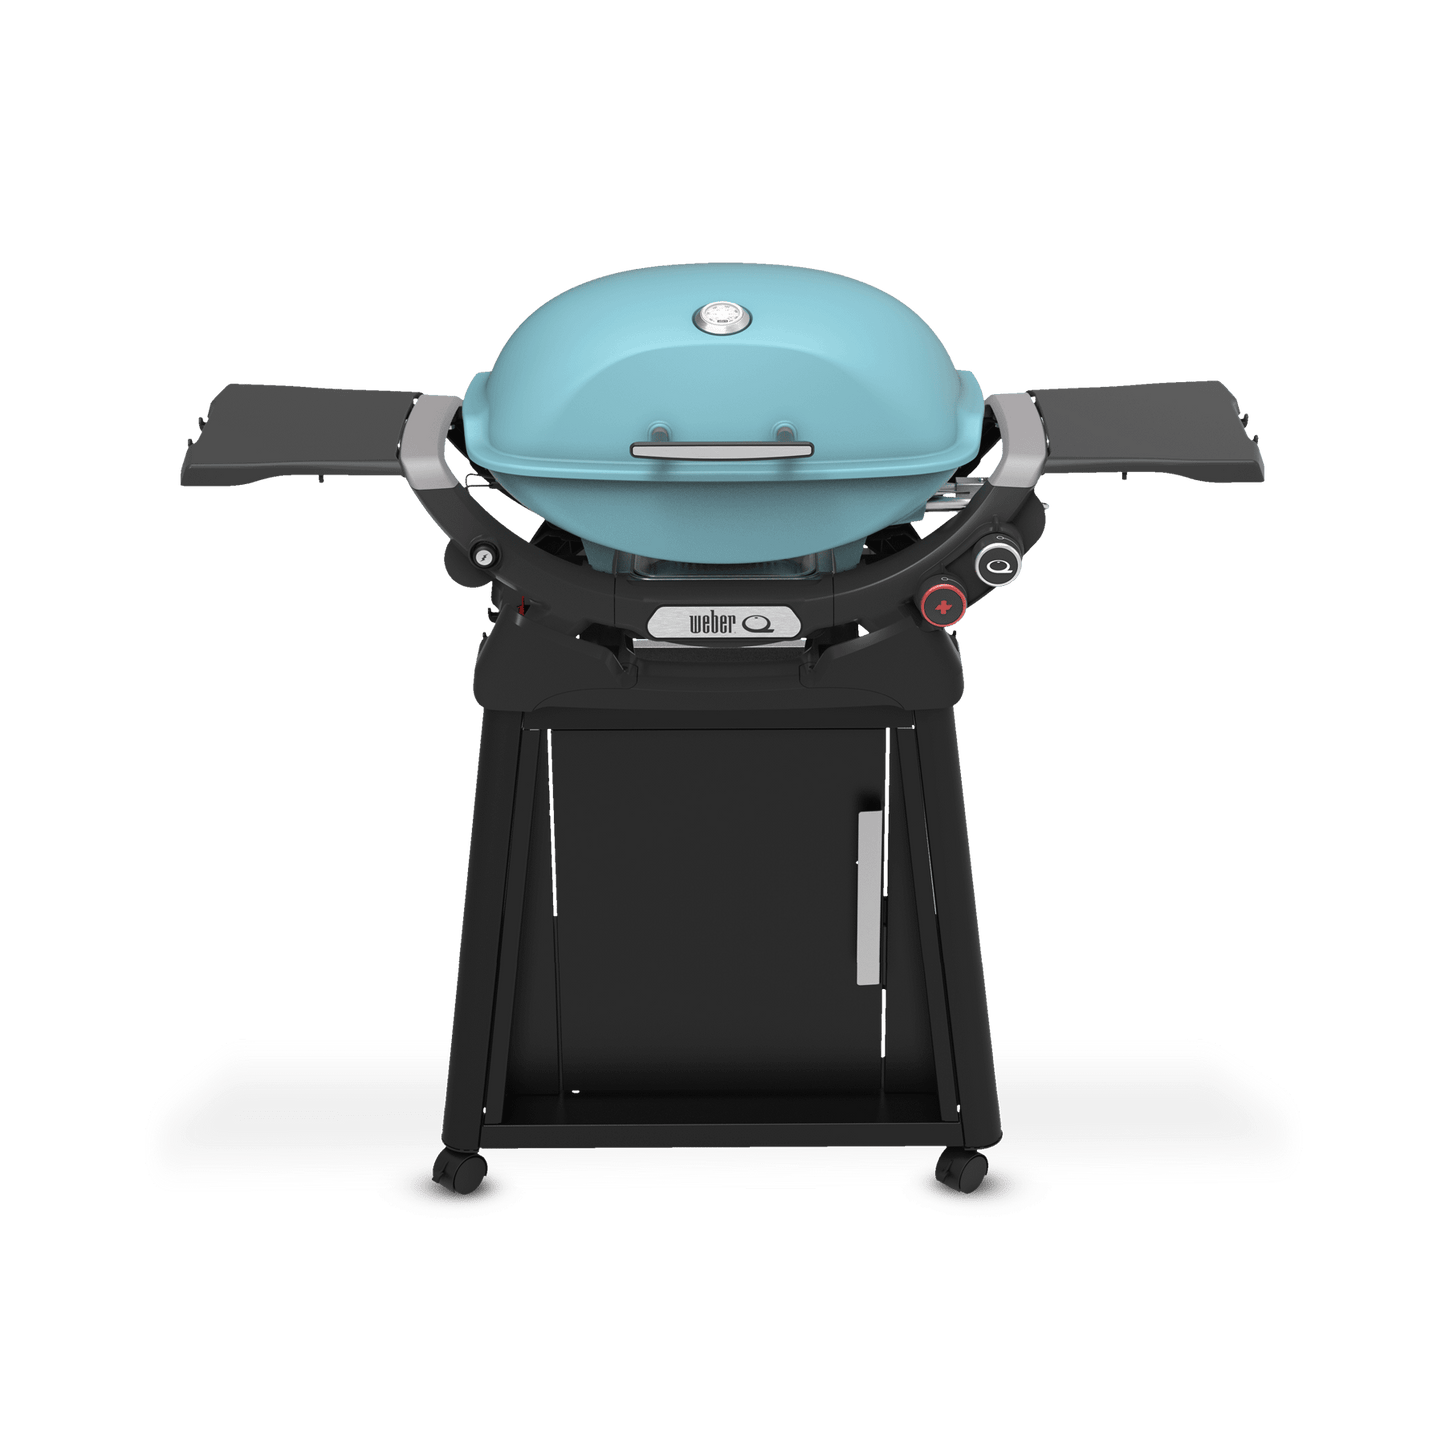 Weber 1500394 Q 2800N+ Gas Grill With Stand (Liquid Propane) - Sky Blue